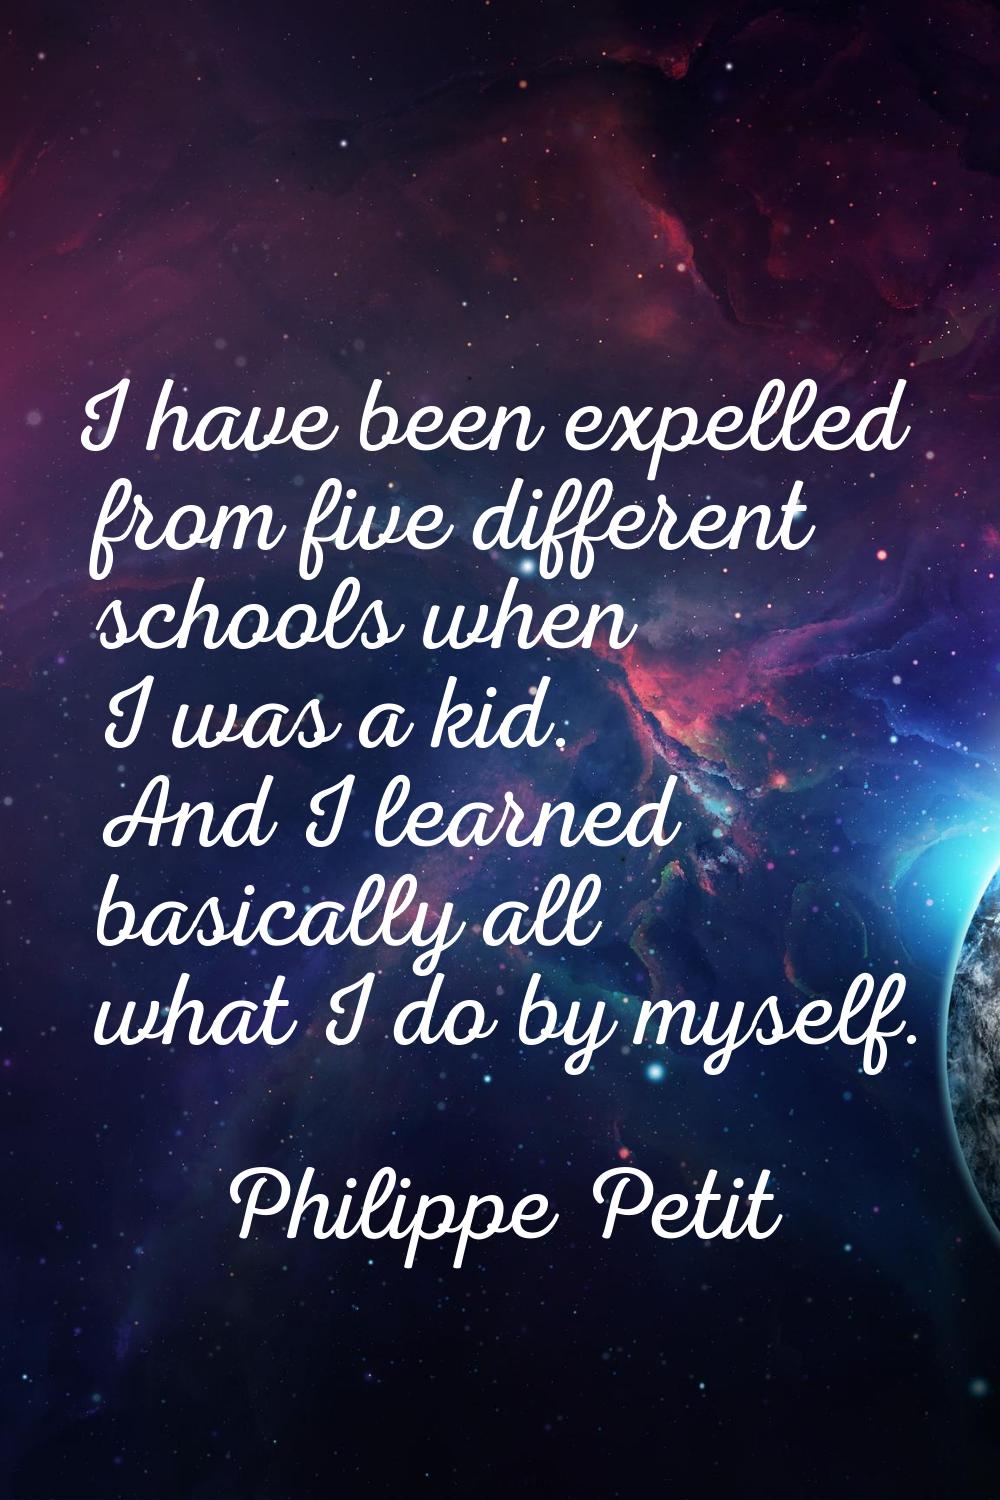 I have been expelled from five different schools when I was a kid. And I learned basically all what